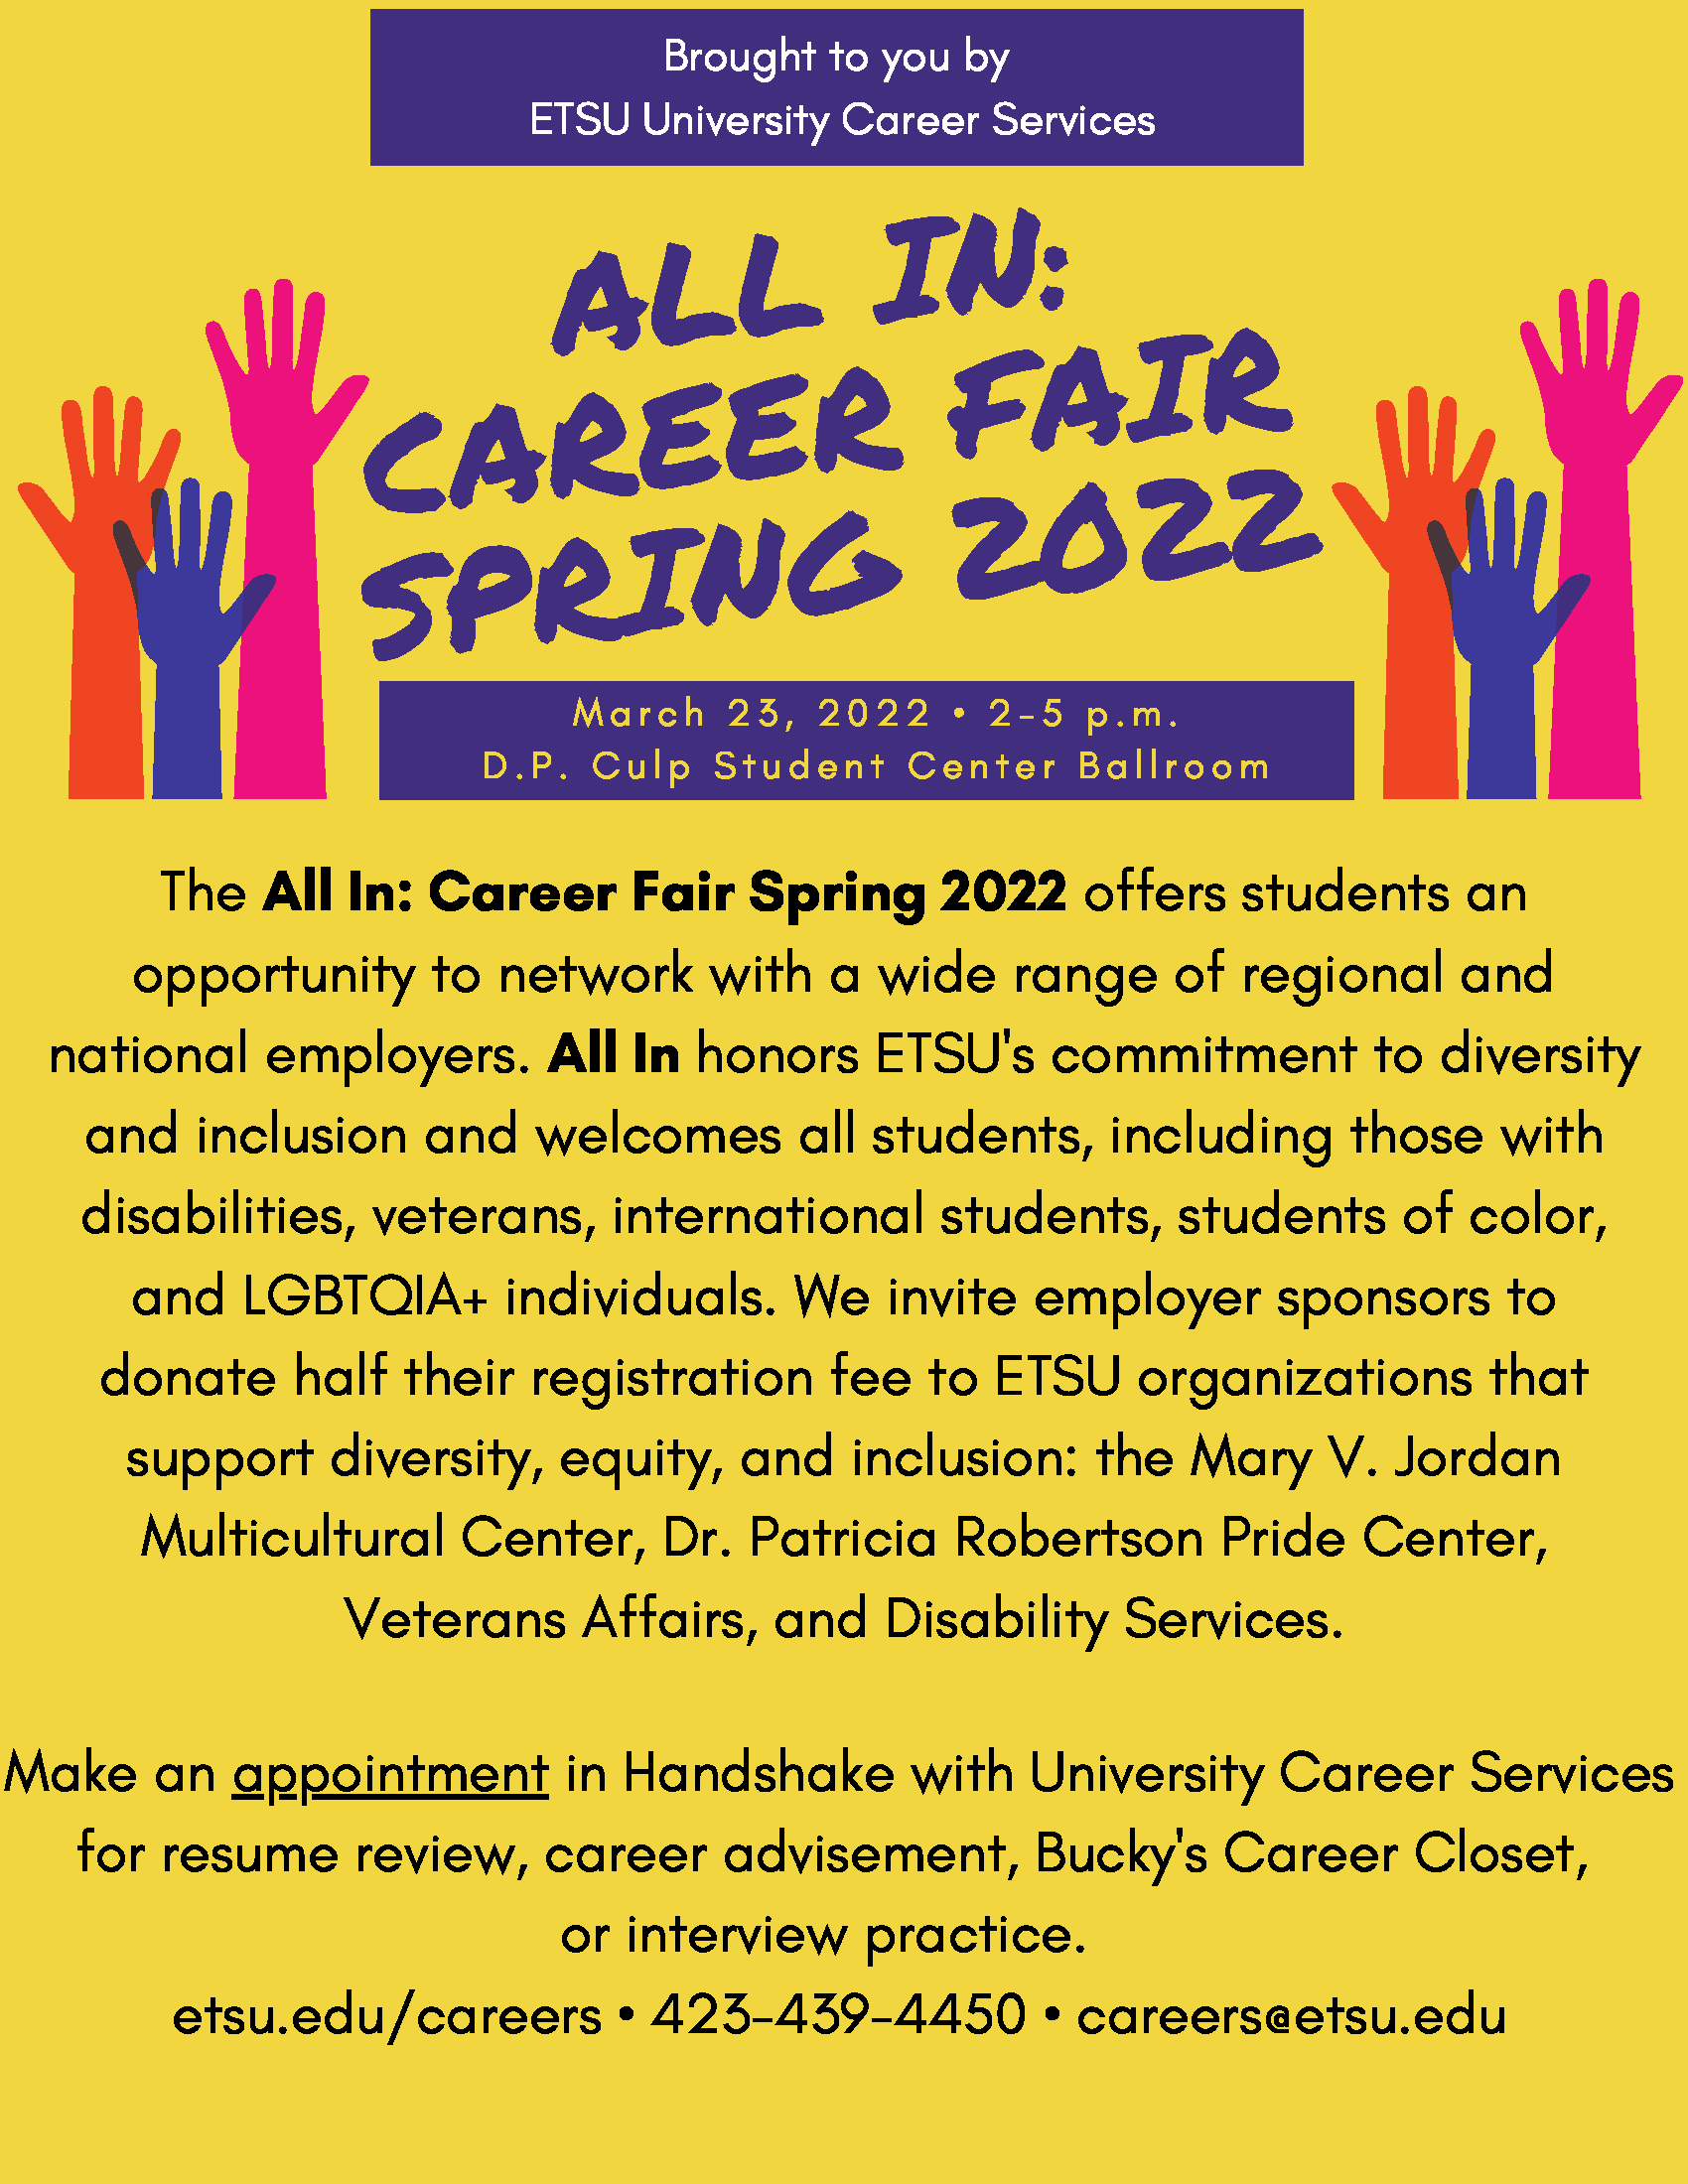 All In Career Fair poster with event information detailed in the comments above.